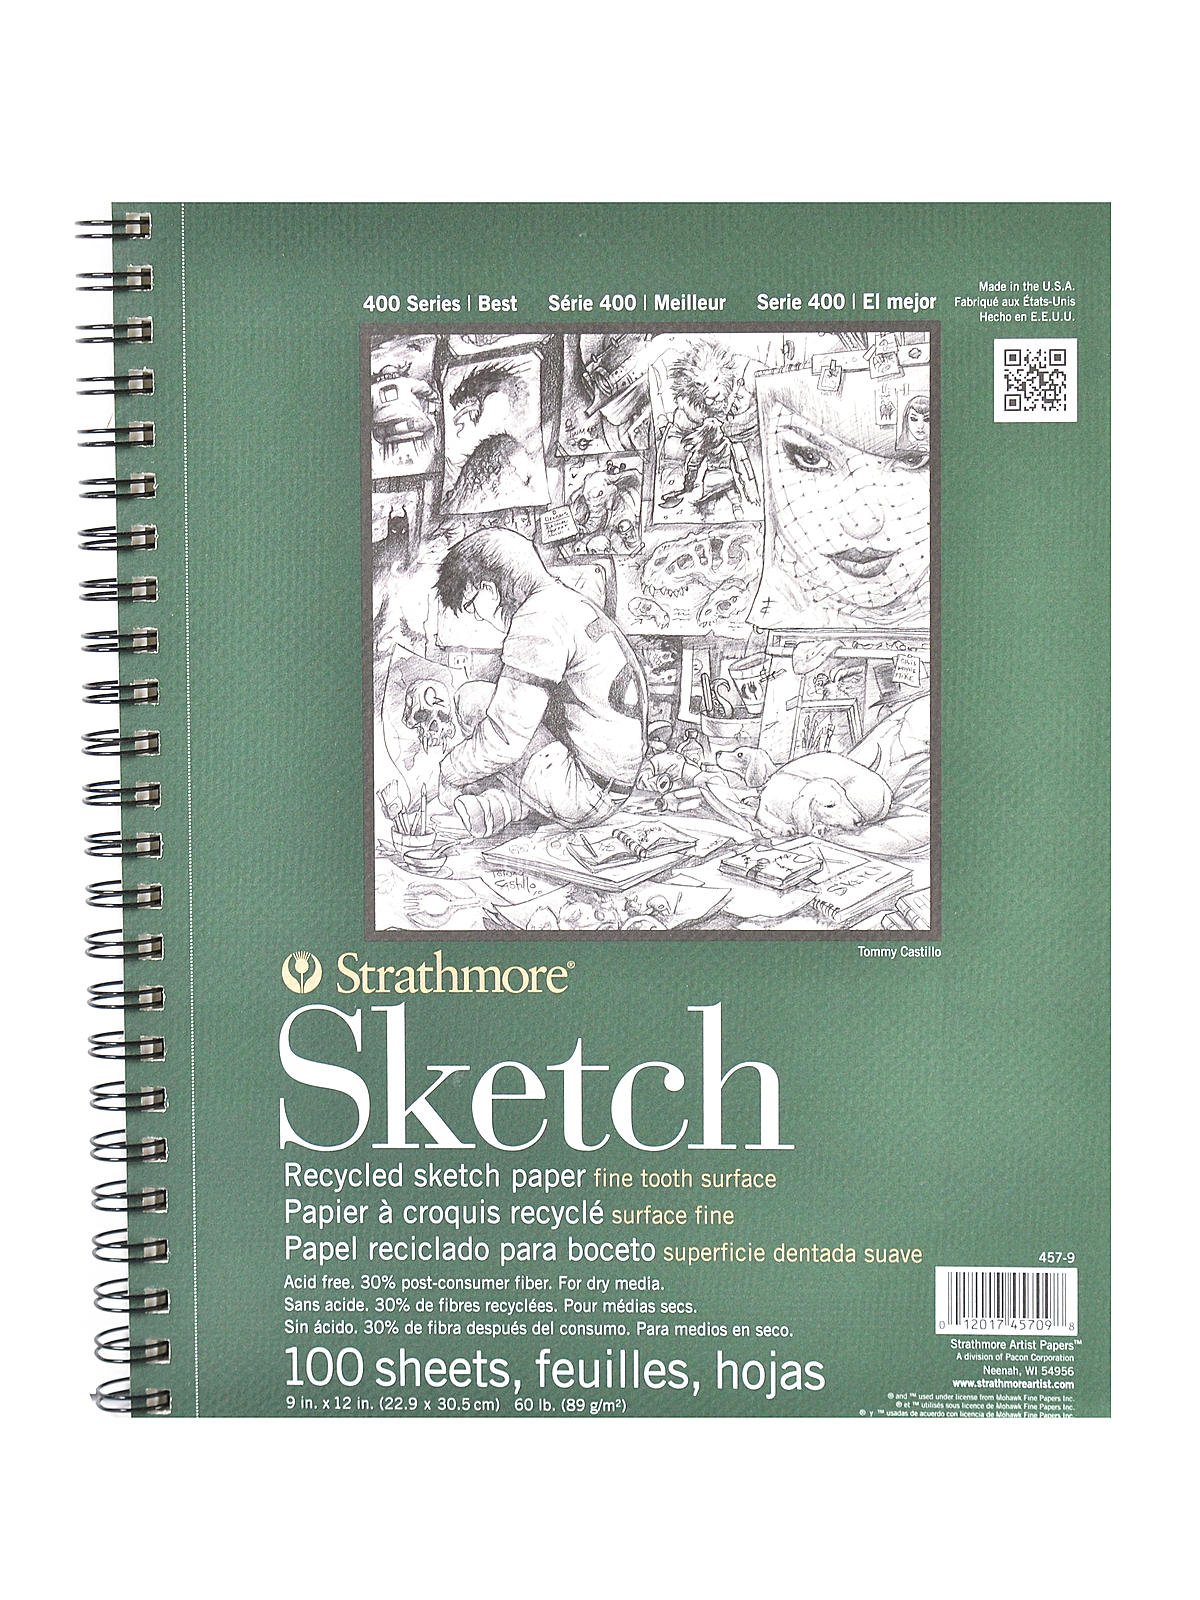 Strathmore Series 400 Premium Recycled Sketch Pads